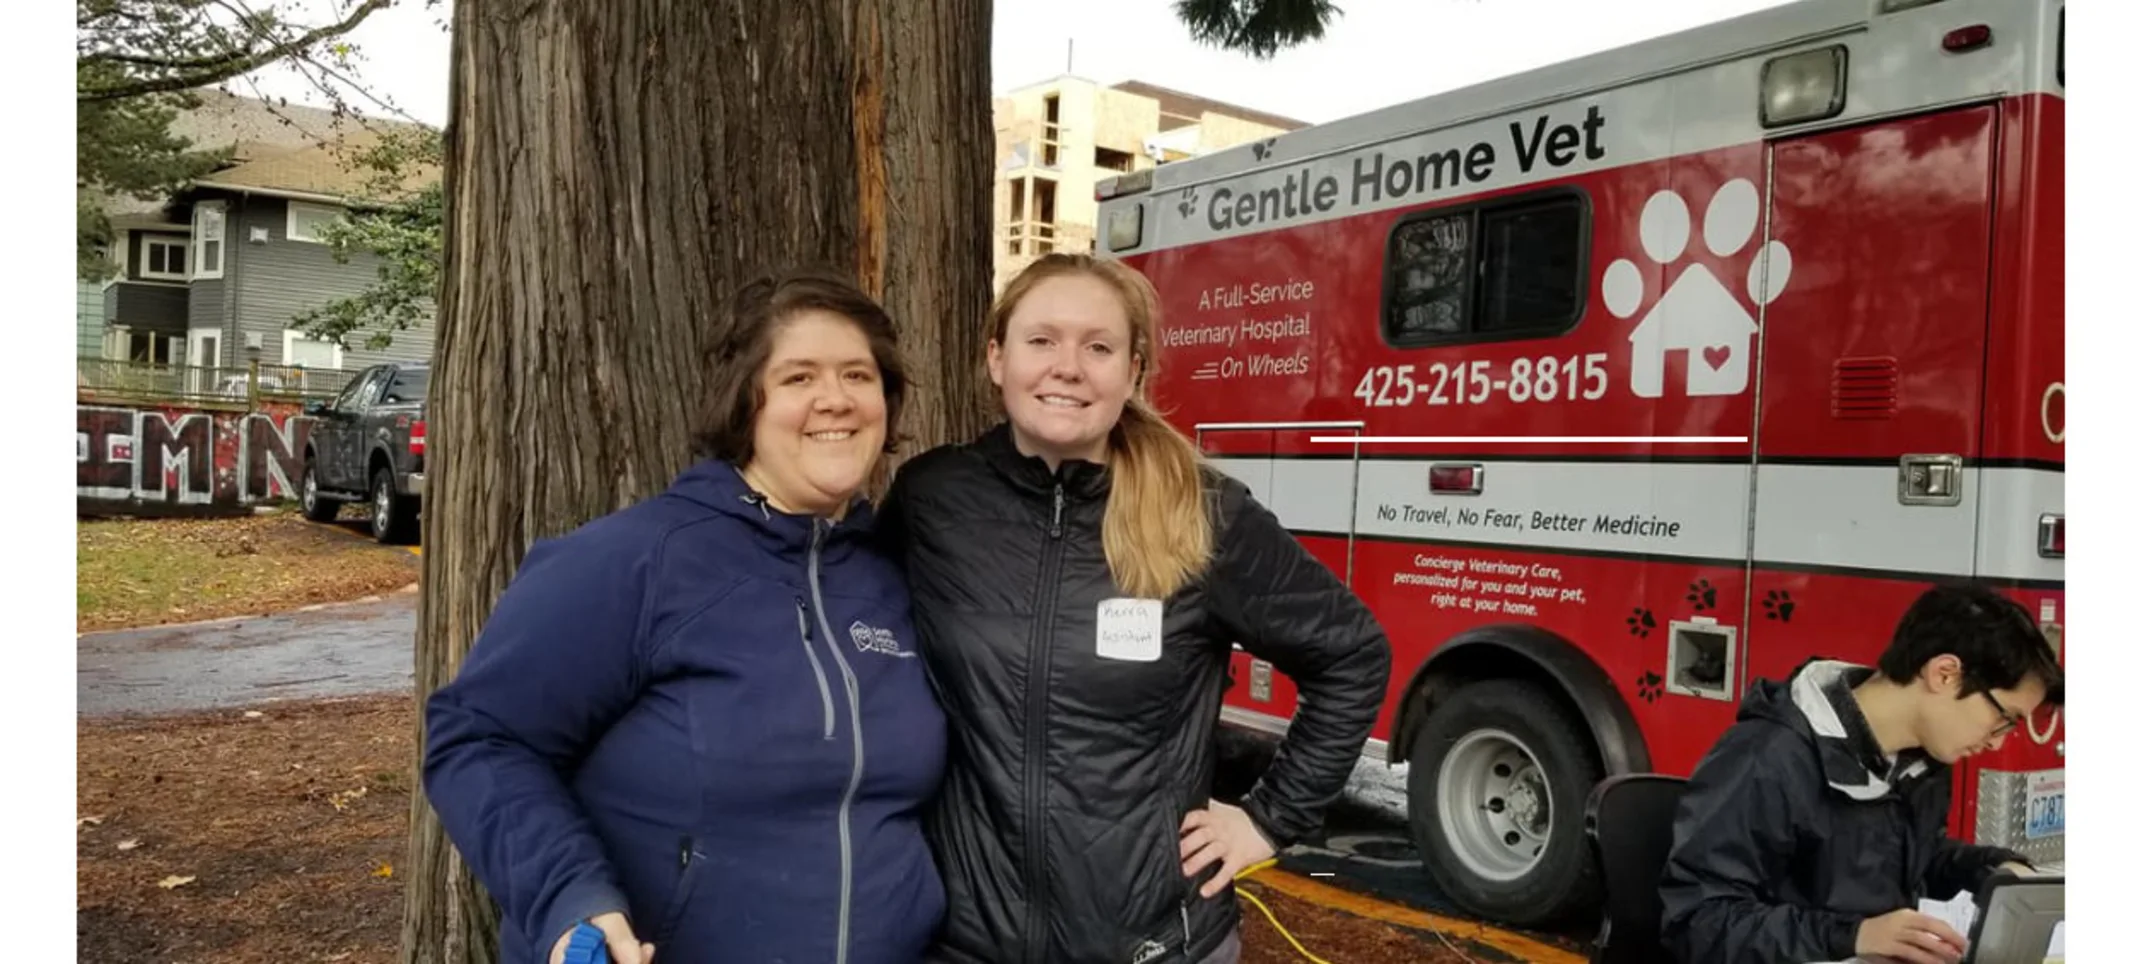 Gentle Home Vet red truck and two women smiling.